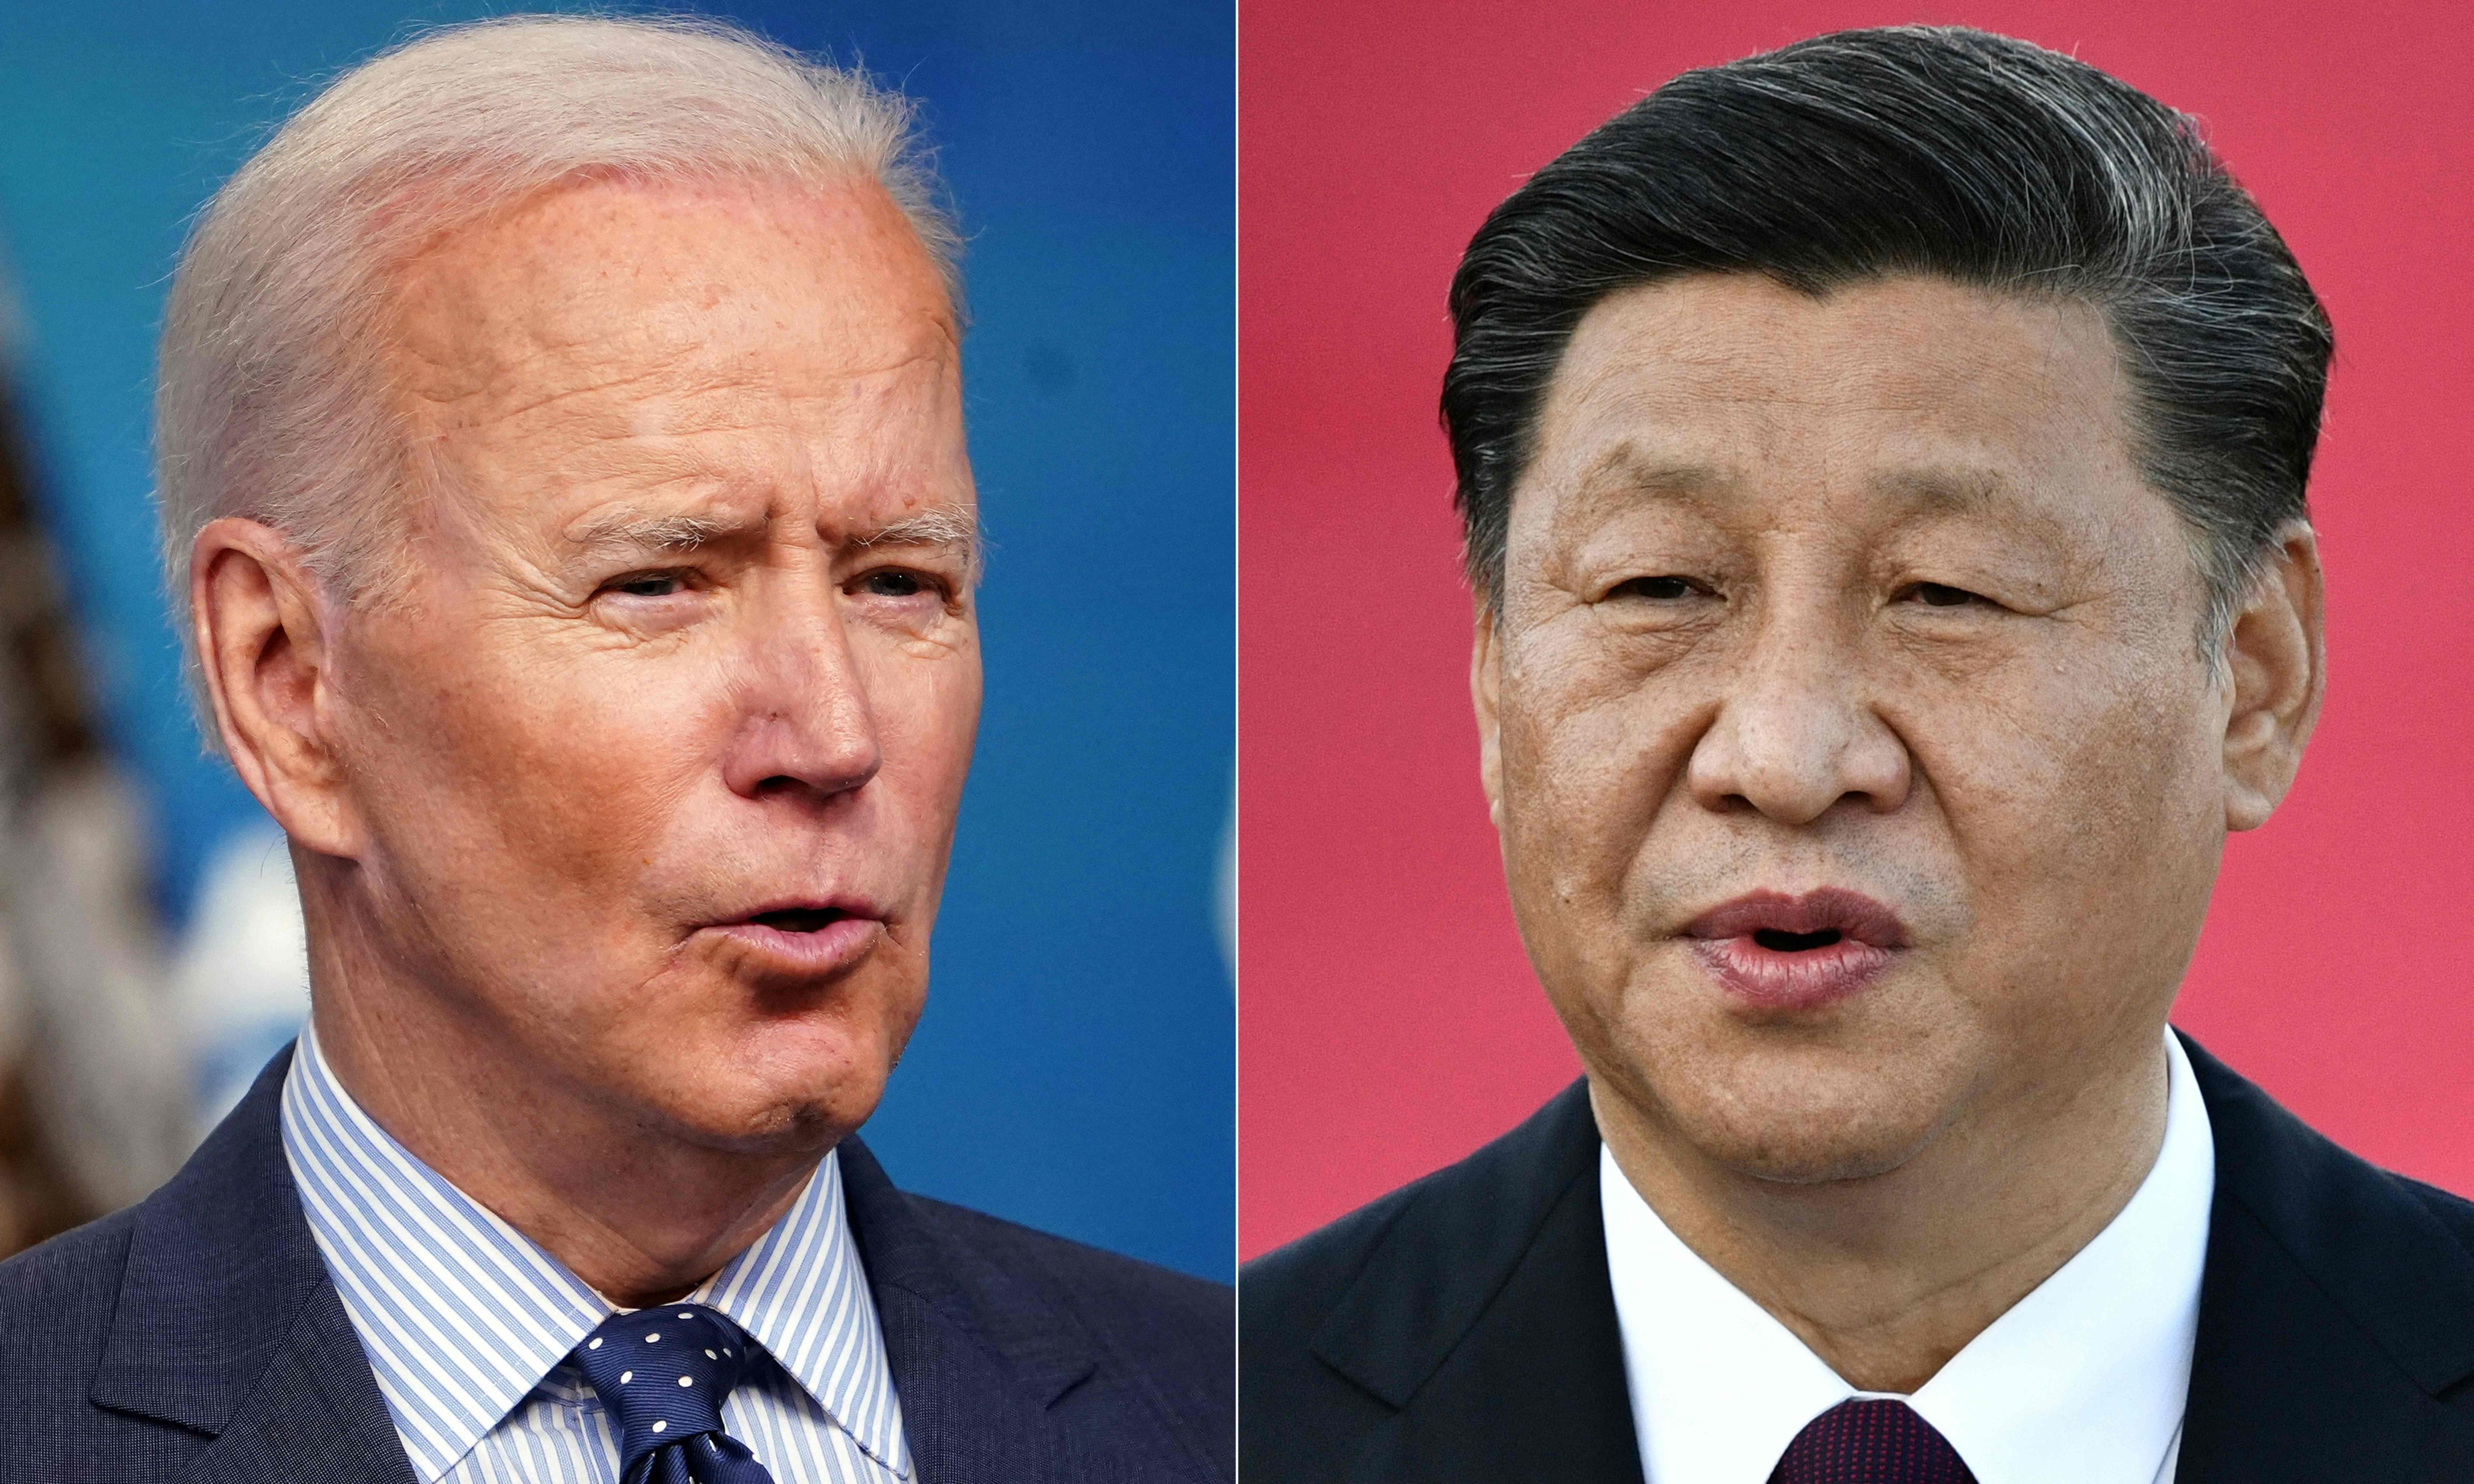 US President Joe Biden and his Chinese counterpart Xi Jinping spoke by phone on Tuesday. Photos: AFP